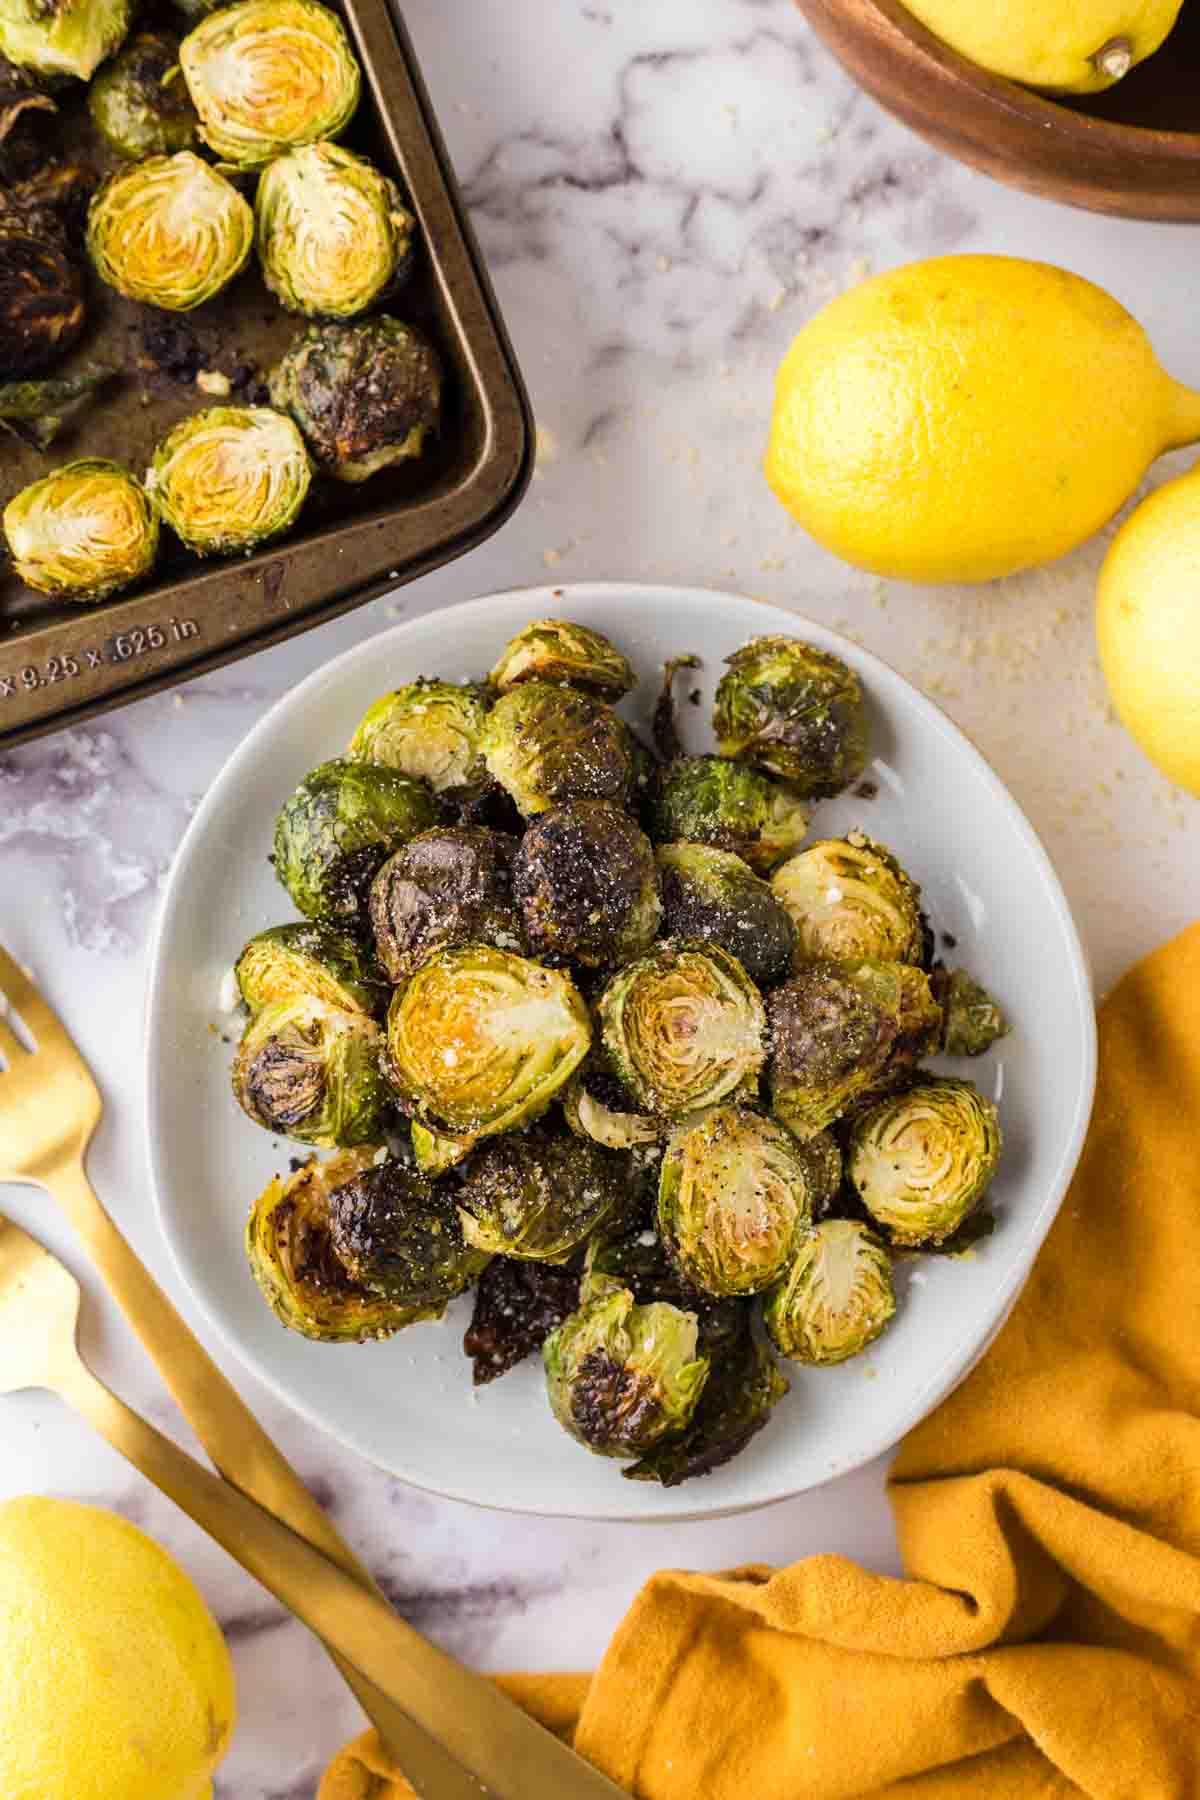 Oven Baked Brussels Sprouts on a round white plate next to whole lemons and golden forks.